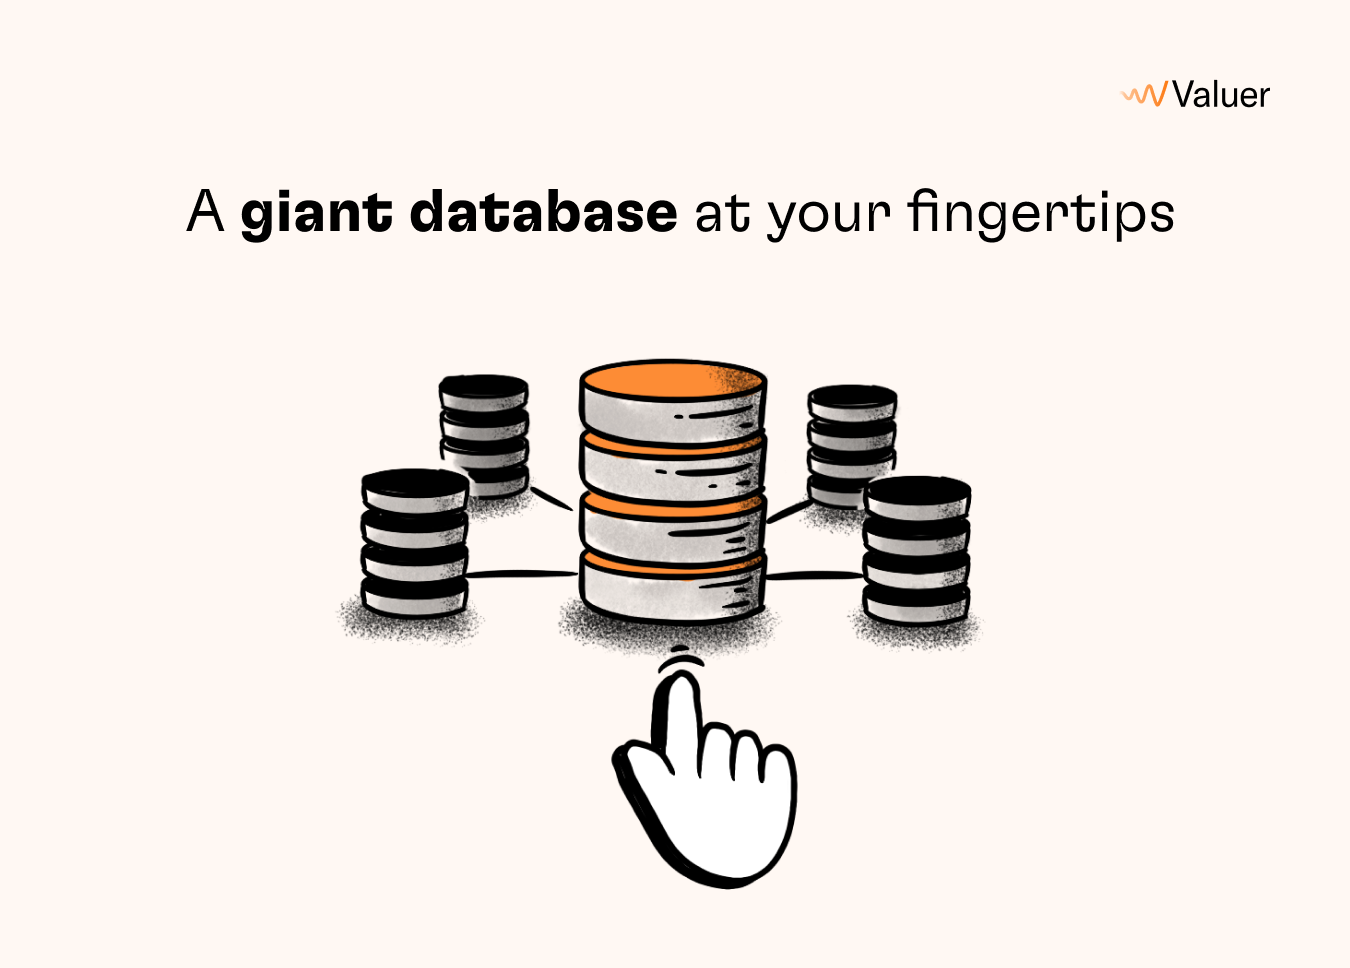 A giant database at your fingertips